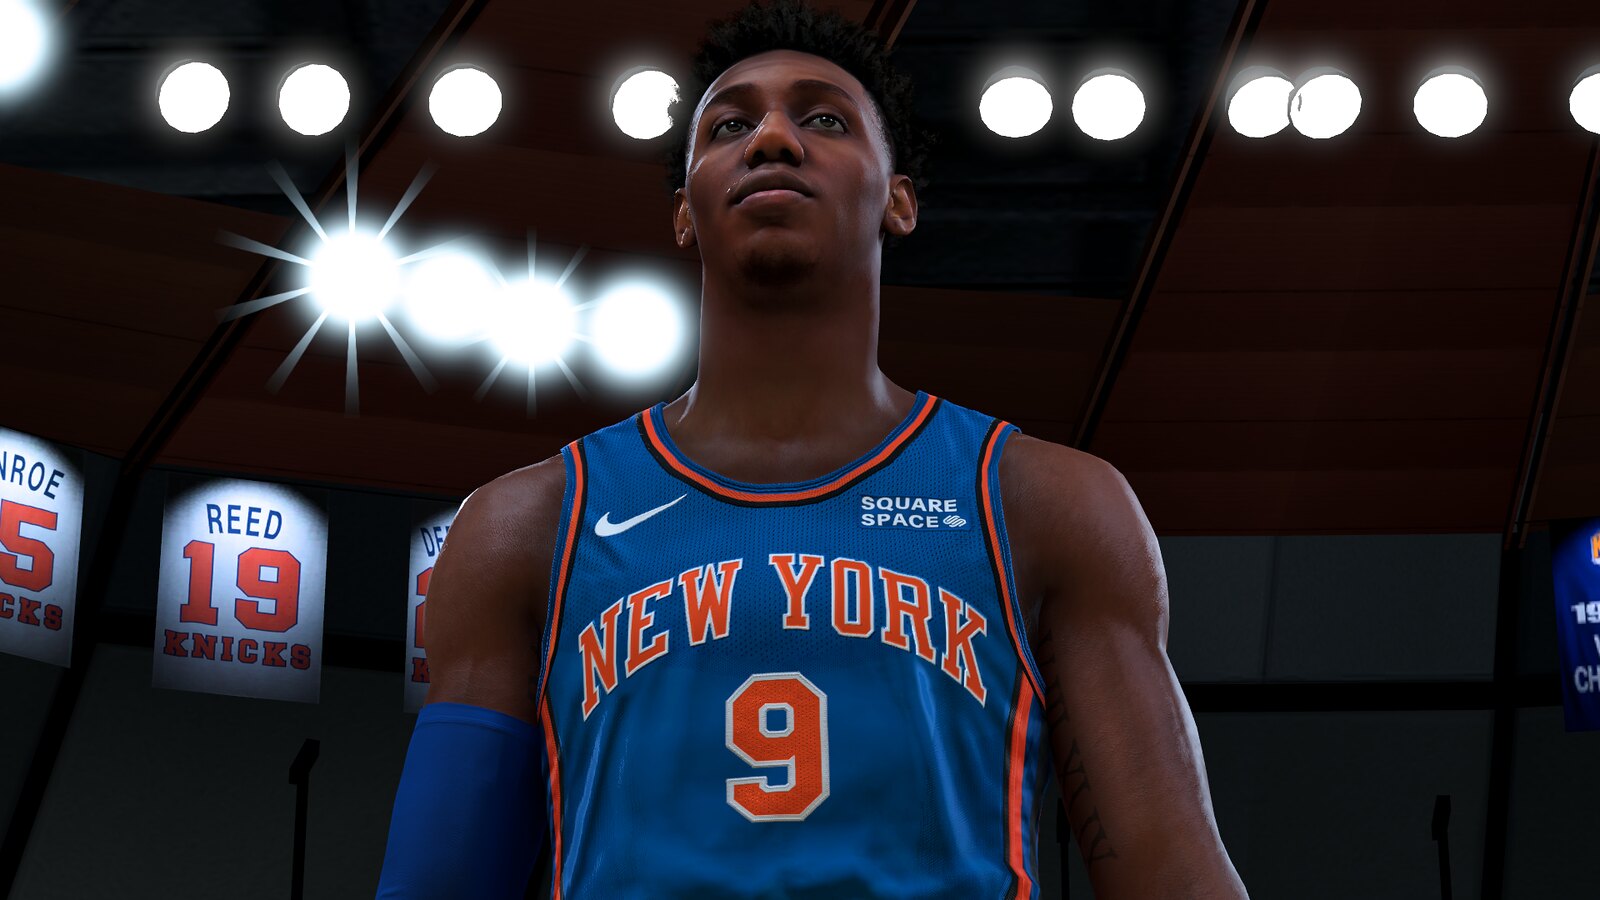 New York Knicks Jersey Concept by Rimbaud82